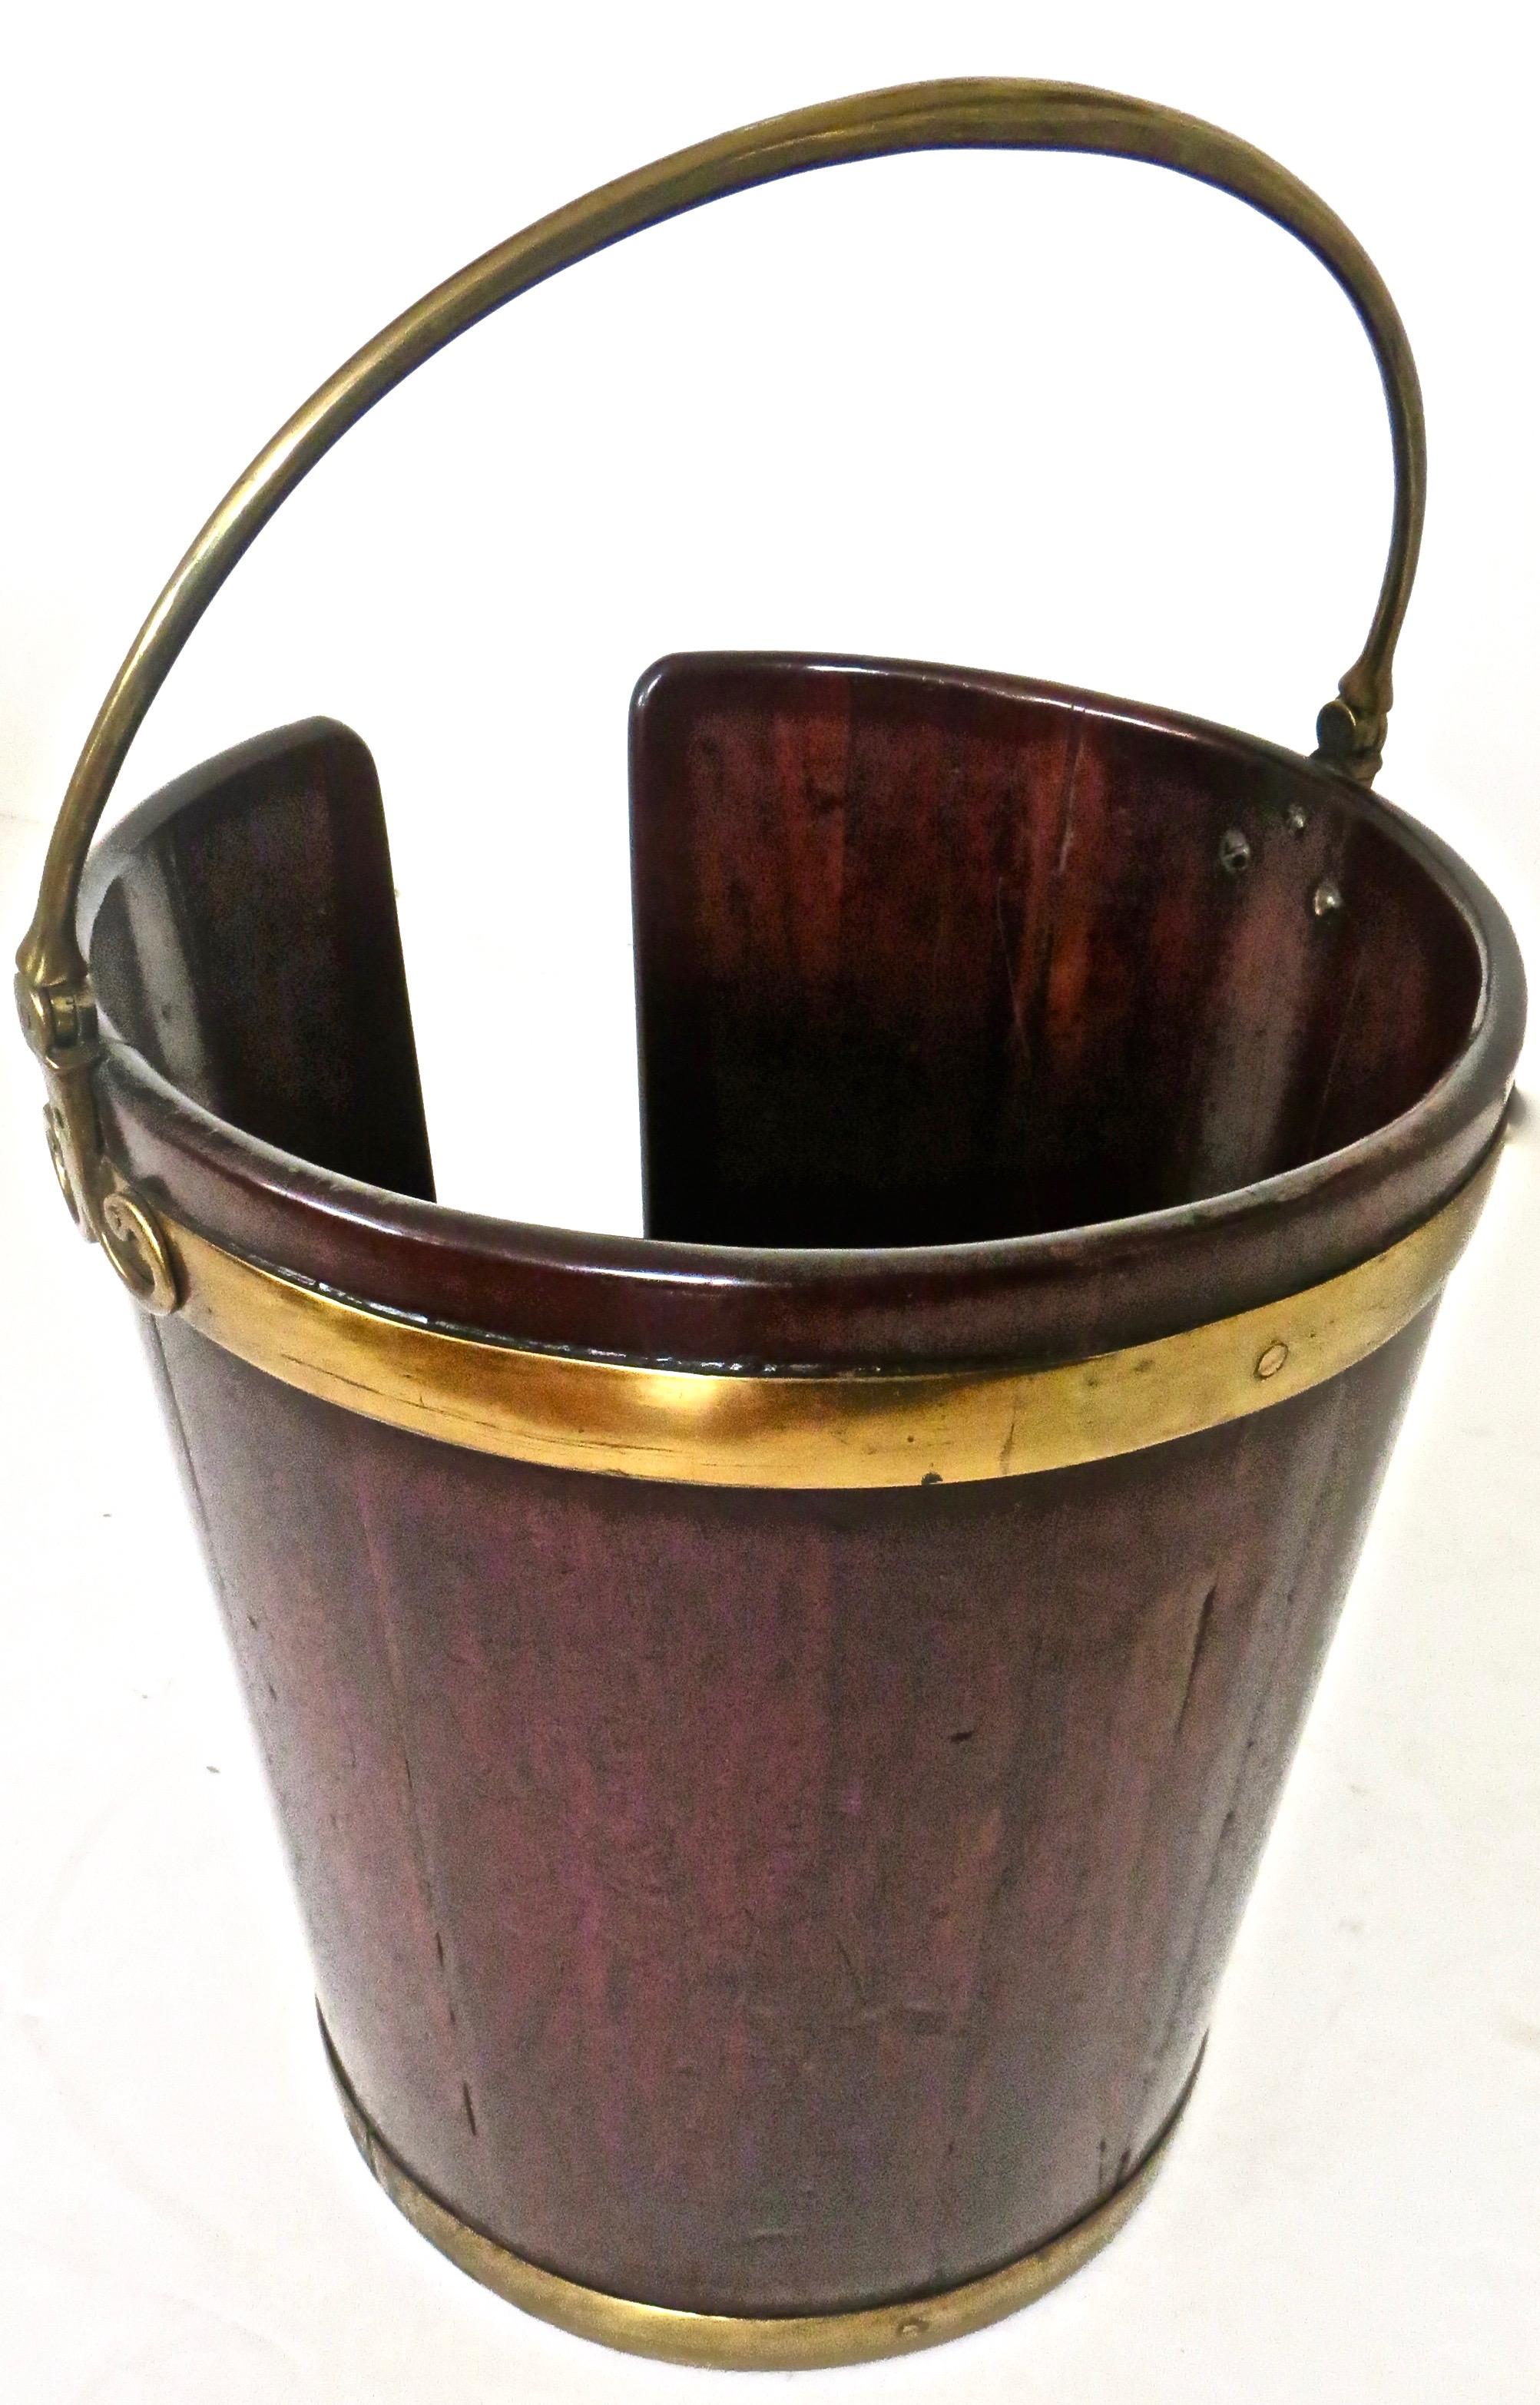 Pair of George III Mahogany Brass-Bound Buckets; 1 Peat and 1 Plate, English 1